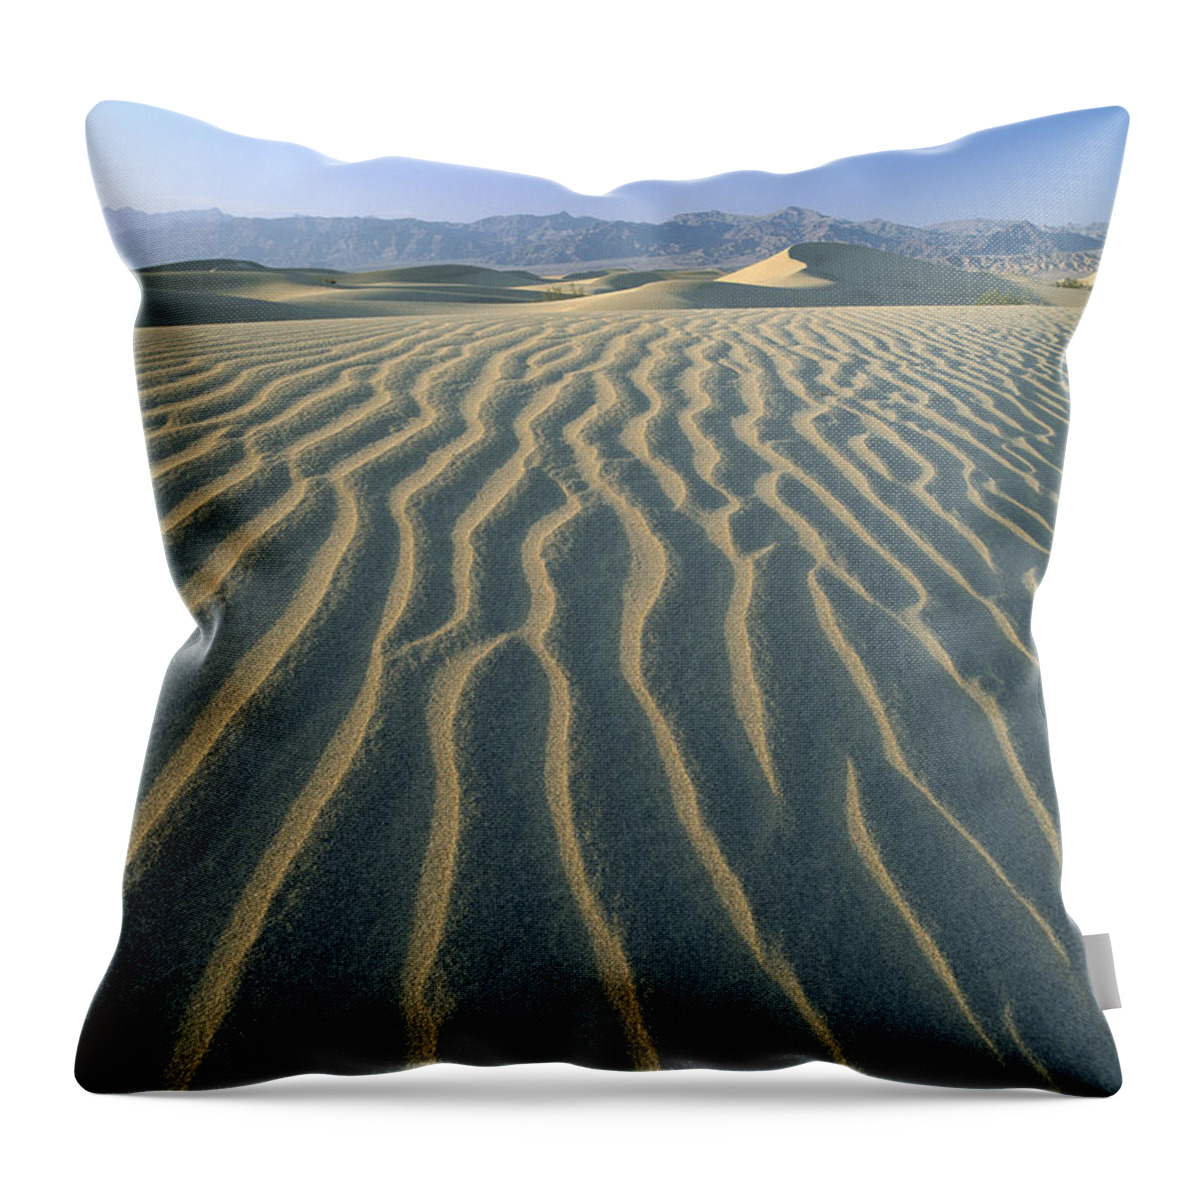 00174938 Throw Pillow featuring the photograph Mesquite Flat Sand Dunes Death Valley #3 by Tim Fitzharris